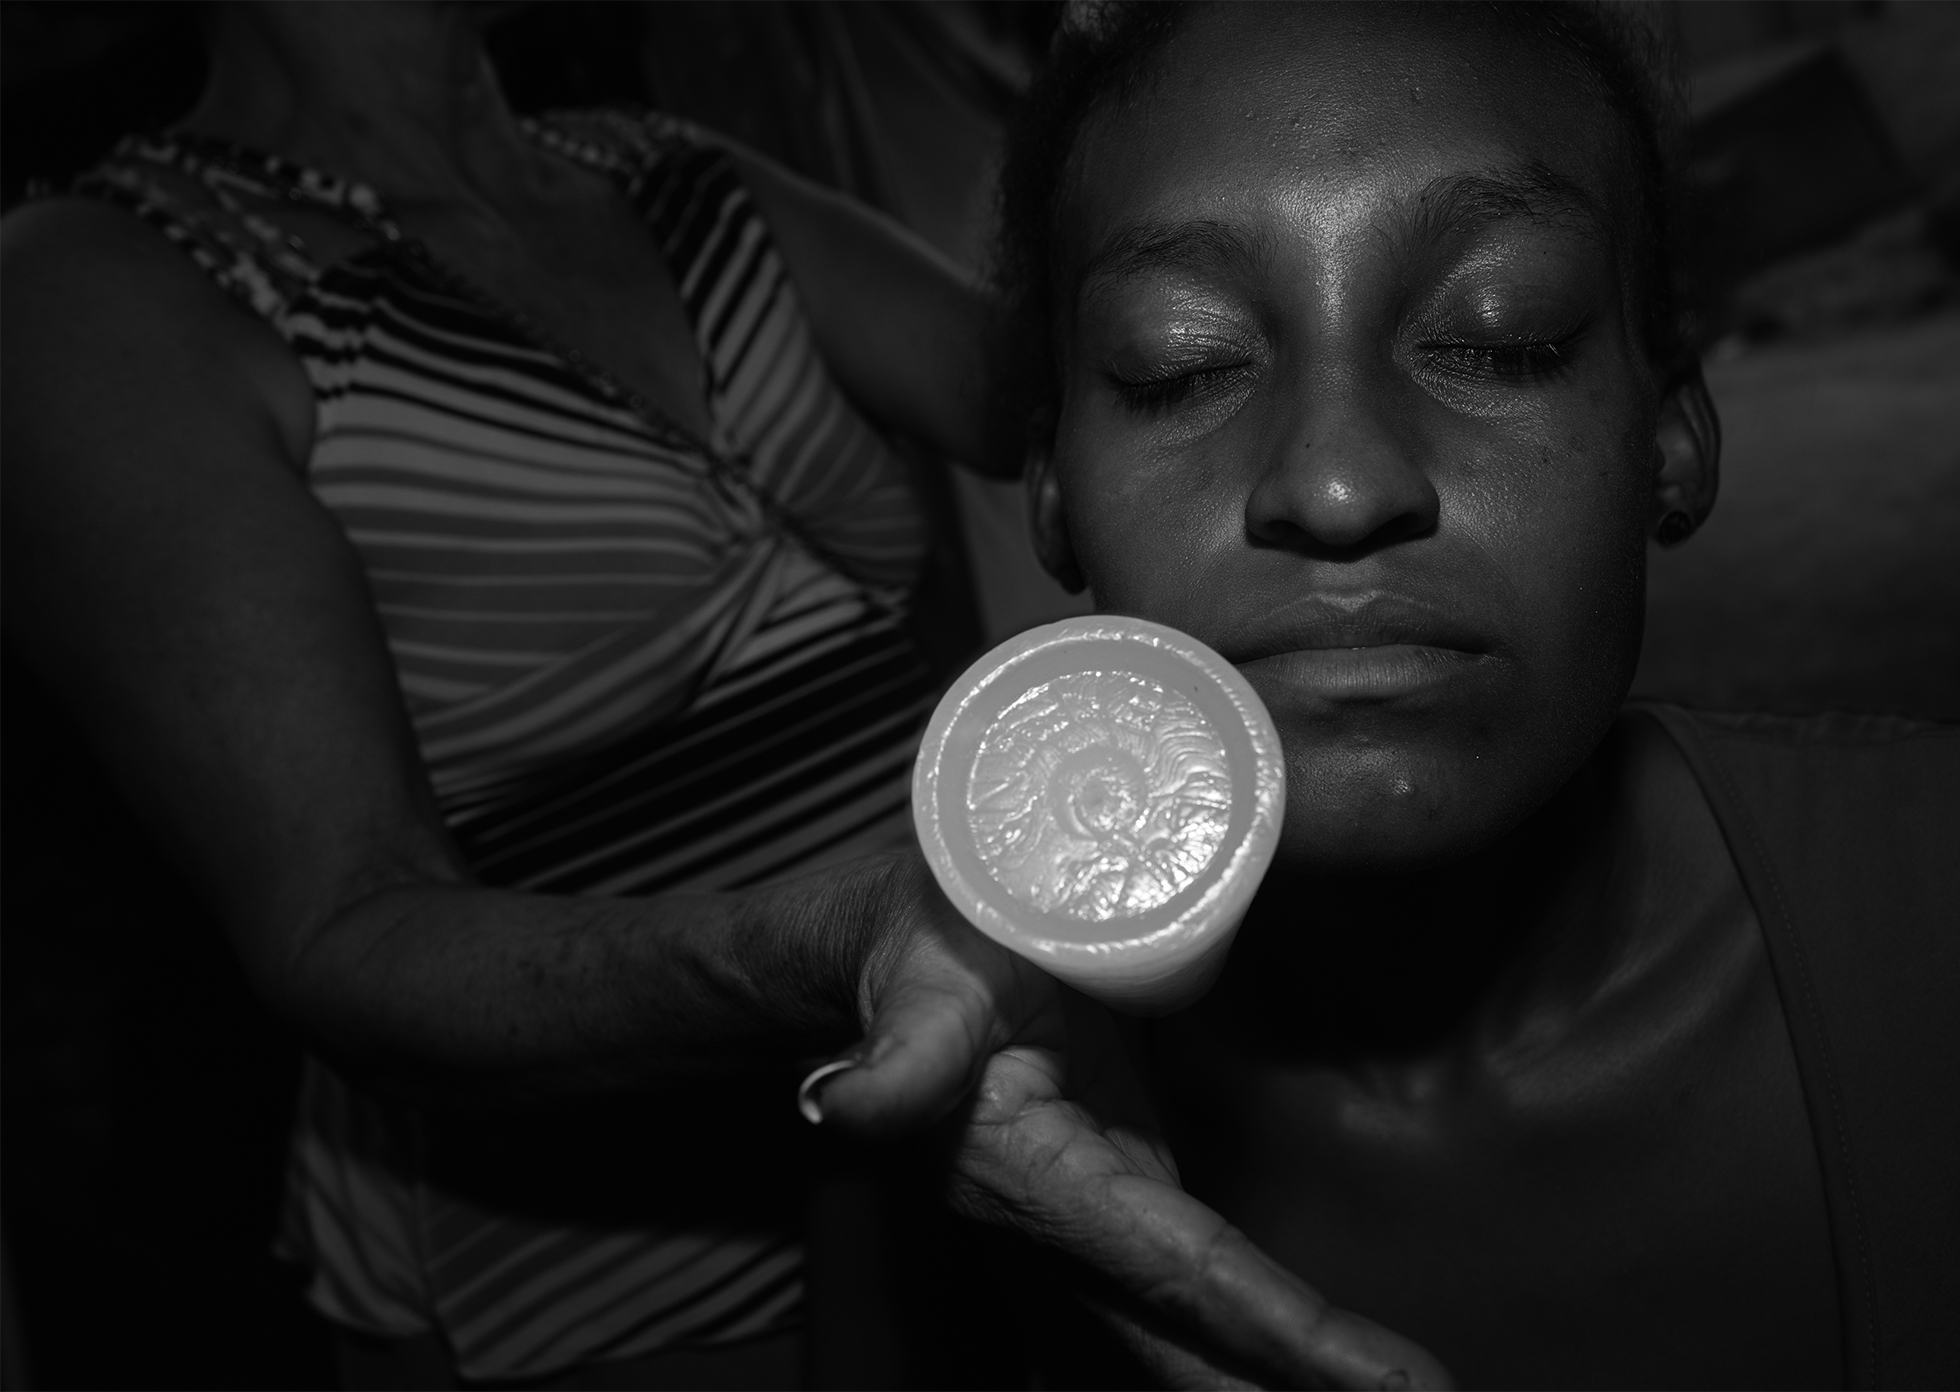 A young woman is treated for an illness by a traditional healer. The young woman closes her eyes as the healer rolls an object on the side of her face.